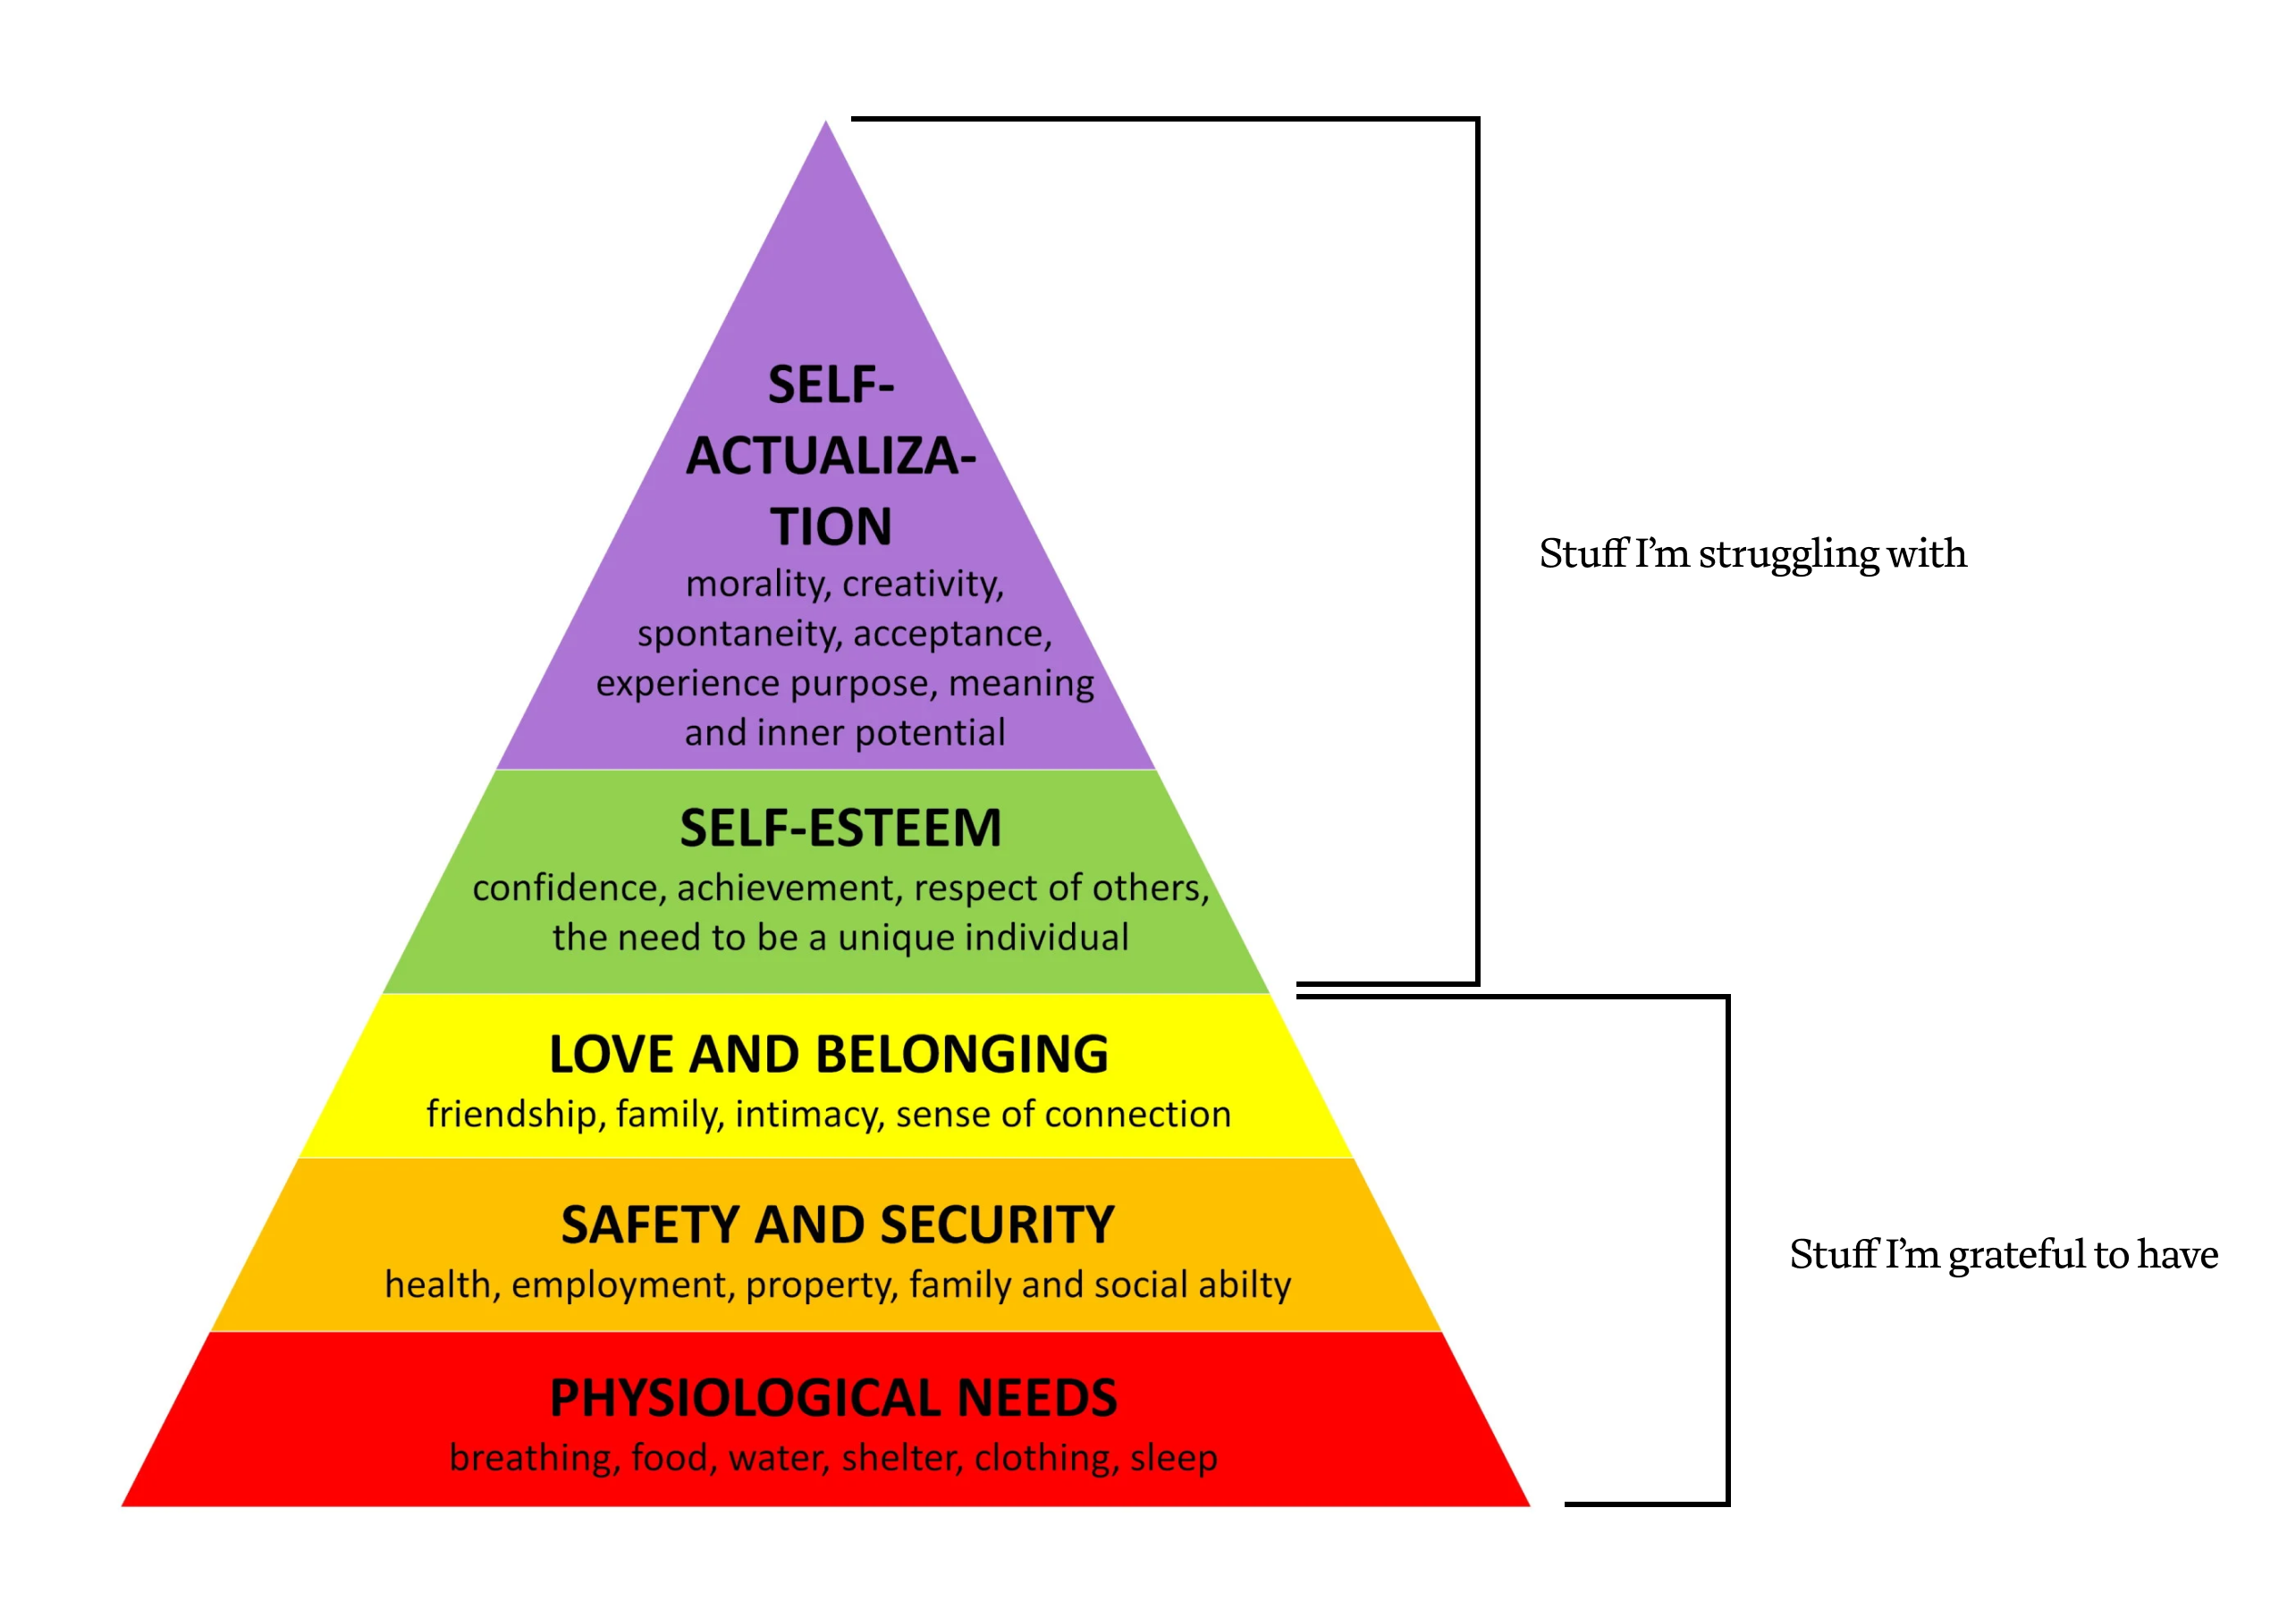 Maslow’s Hierarchy of Needs, from bottom to top: Physiological Needs, Safety and Security, Love and Belonging, Self-Esteem, Self-Actualization. I’m grateful to have the Physiological Needs, Safety and Security, and Love and Belonging taken cared of. I’m struggling with Self-Esteem and Self-Actualization.